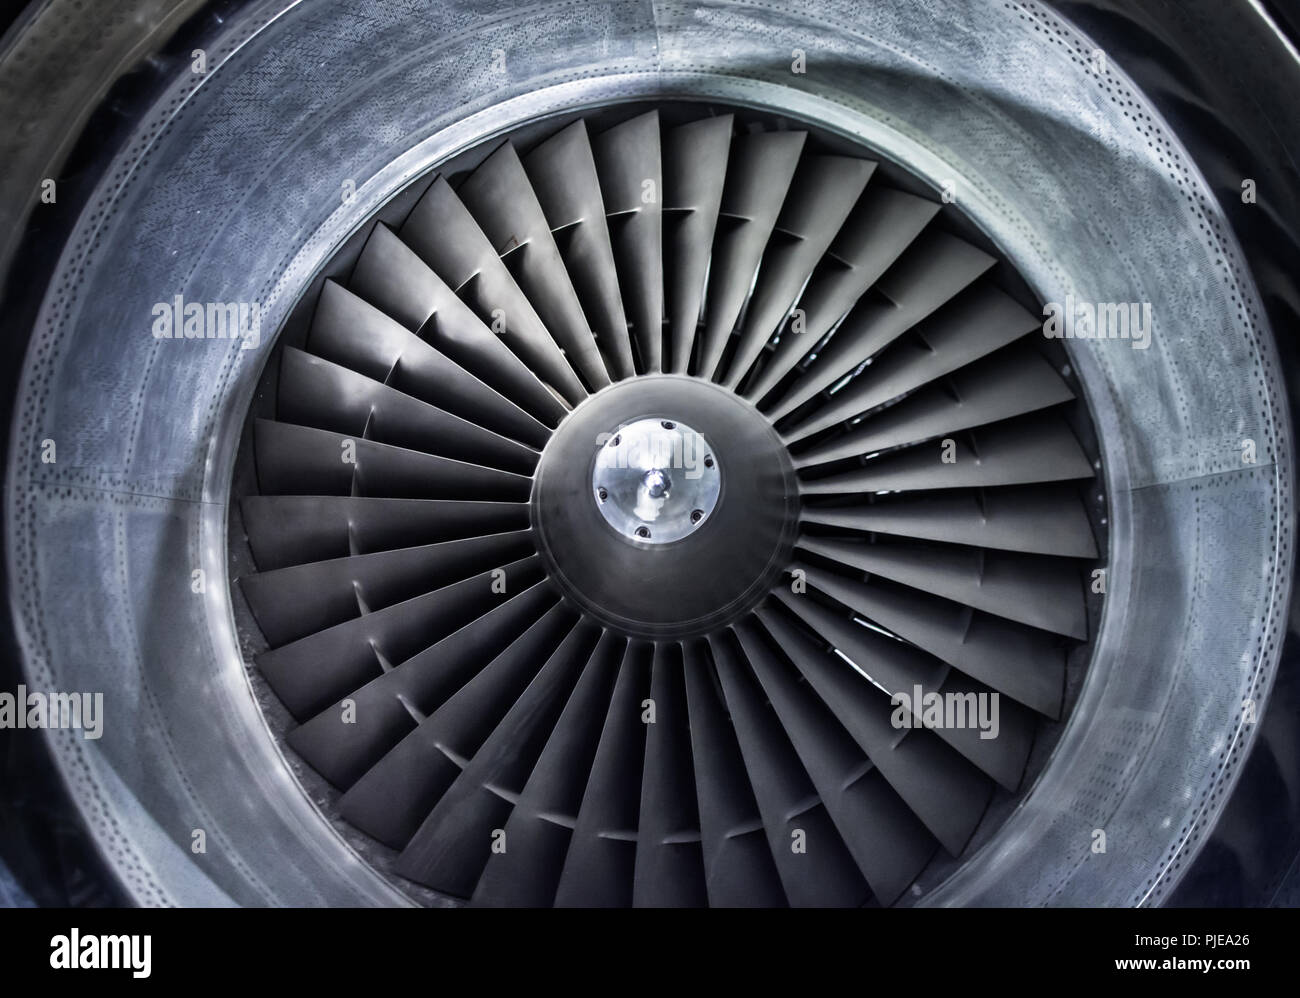 Jet engine. Smithsonian National Air and Space Museum, Washington DC Stock Photo